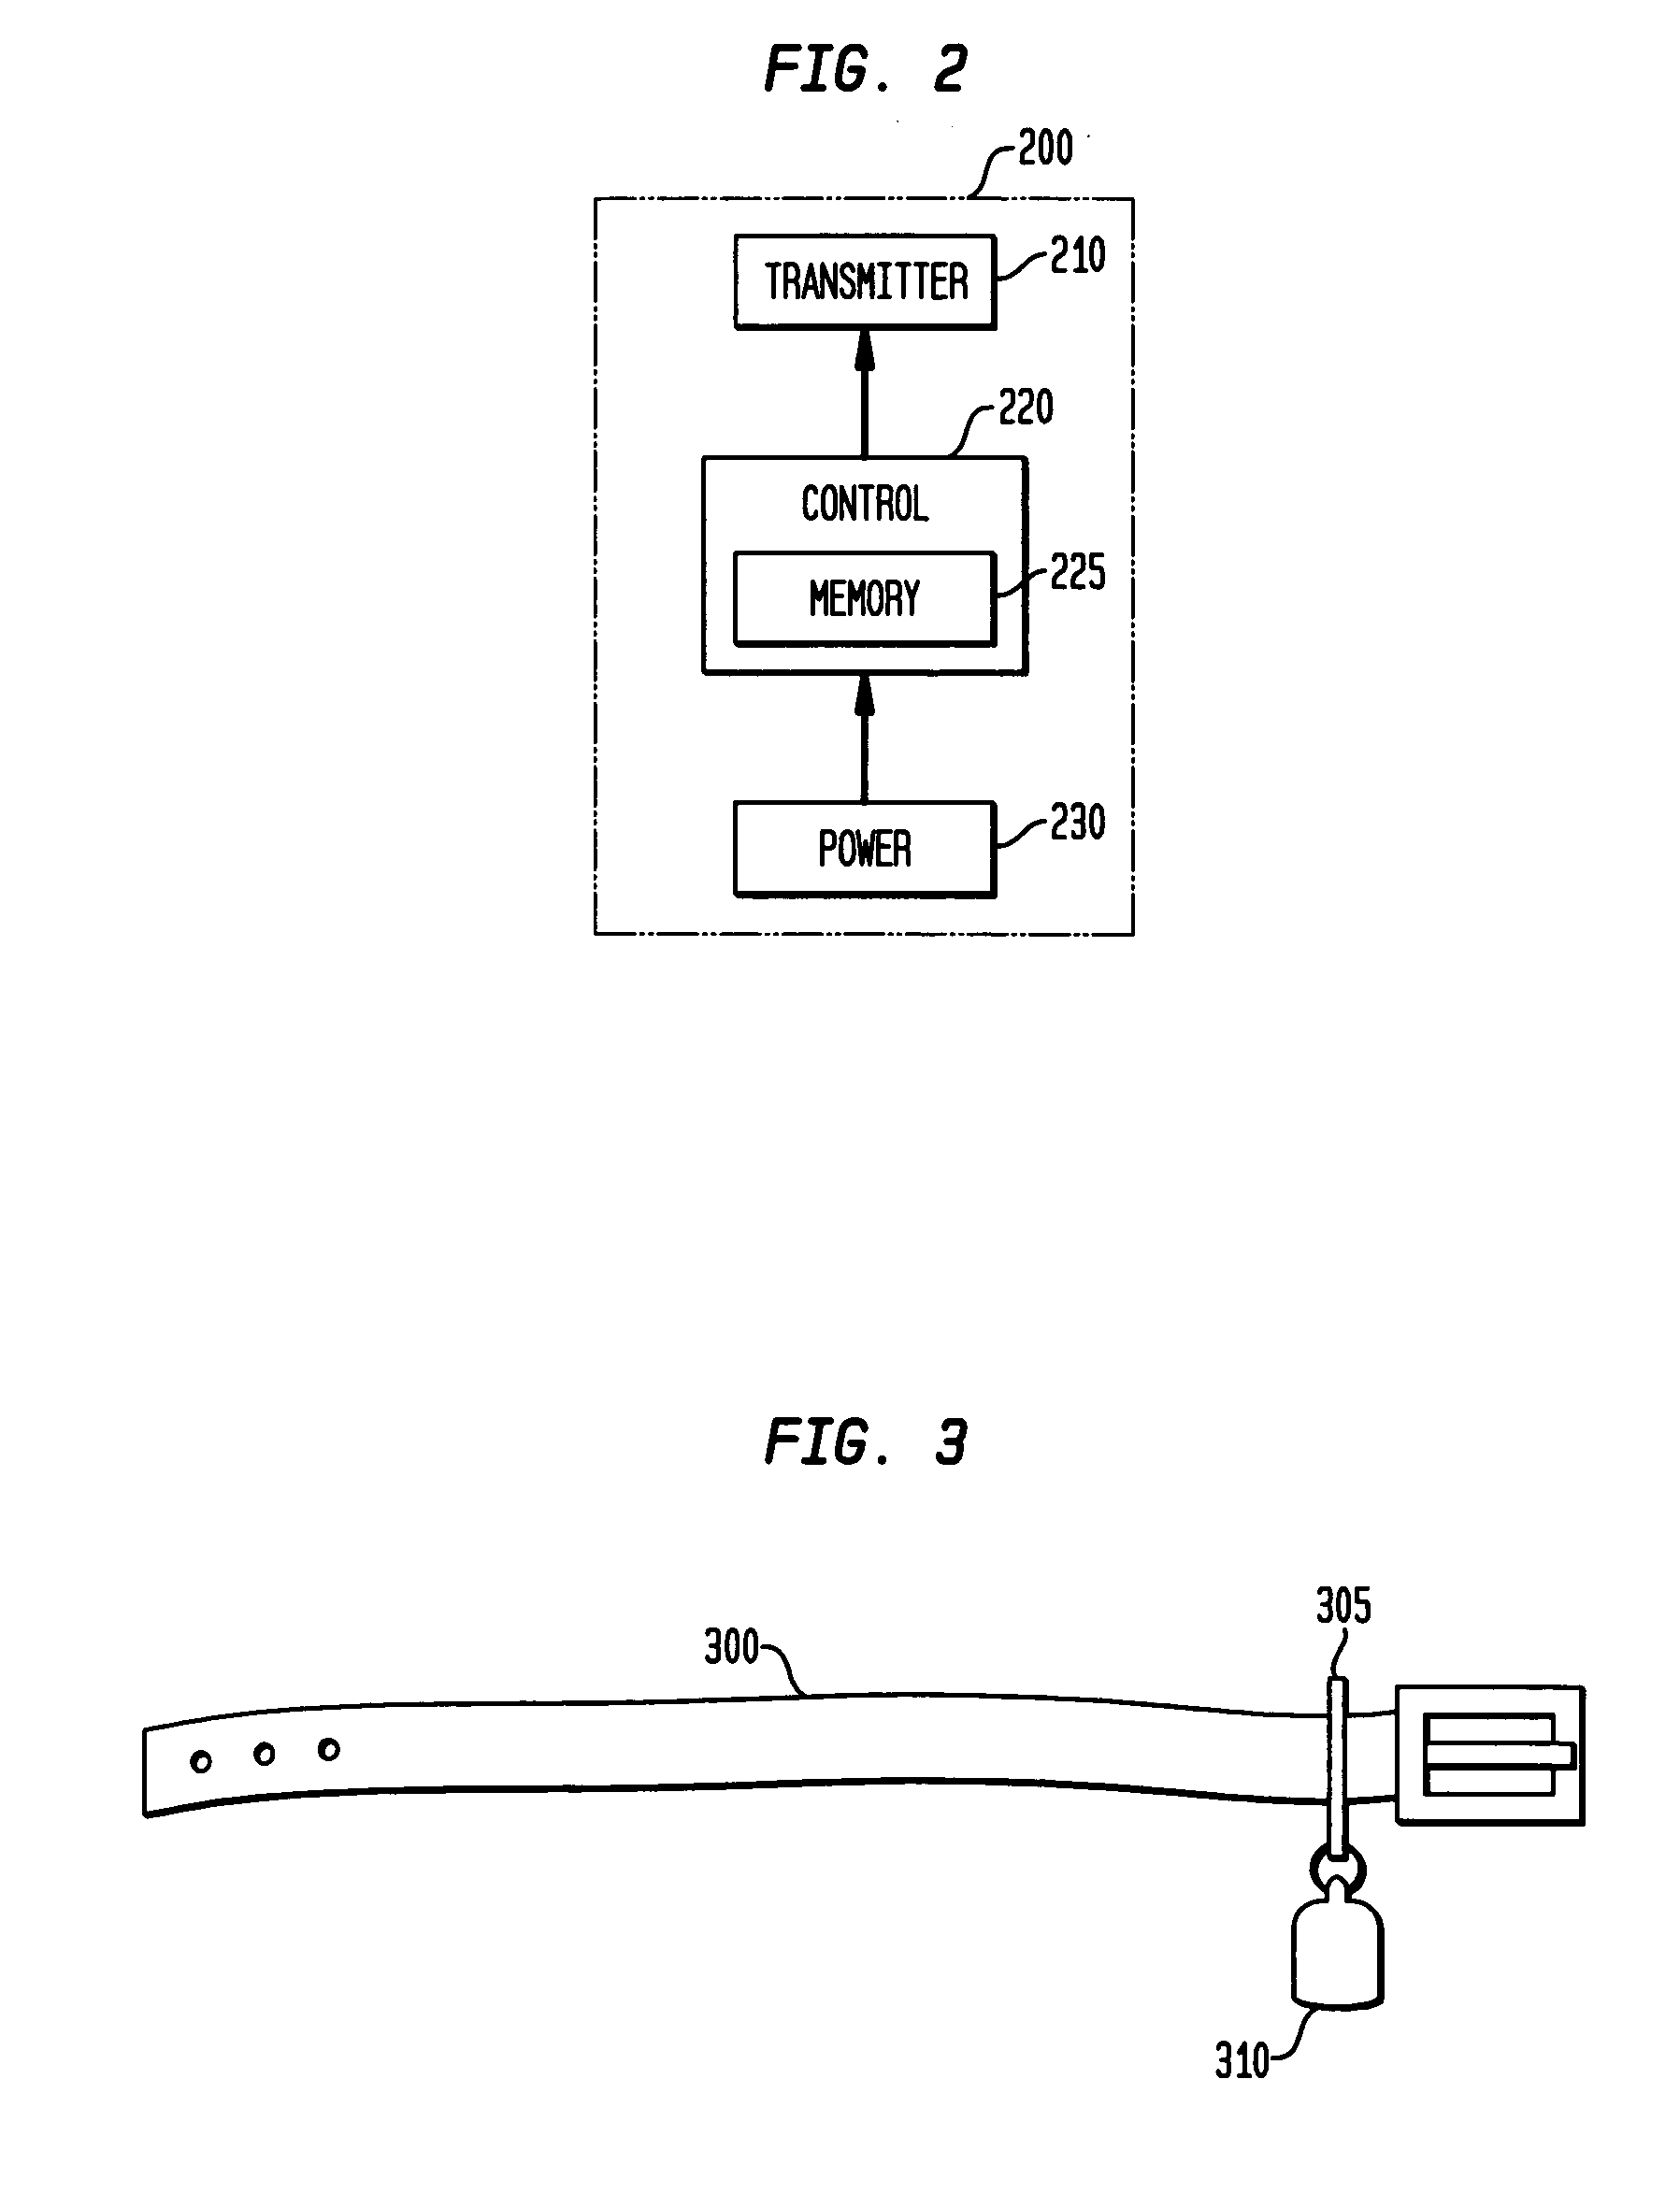 Automatic sensitivity adjustment on motion detectors in security system